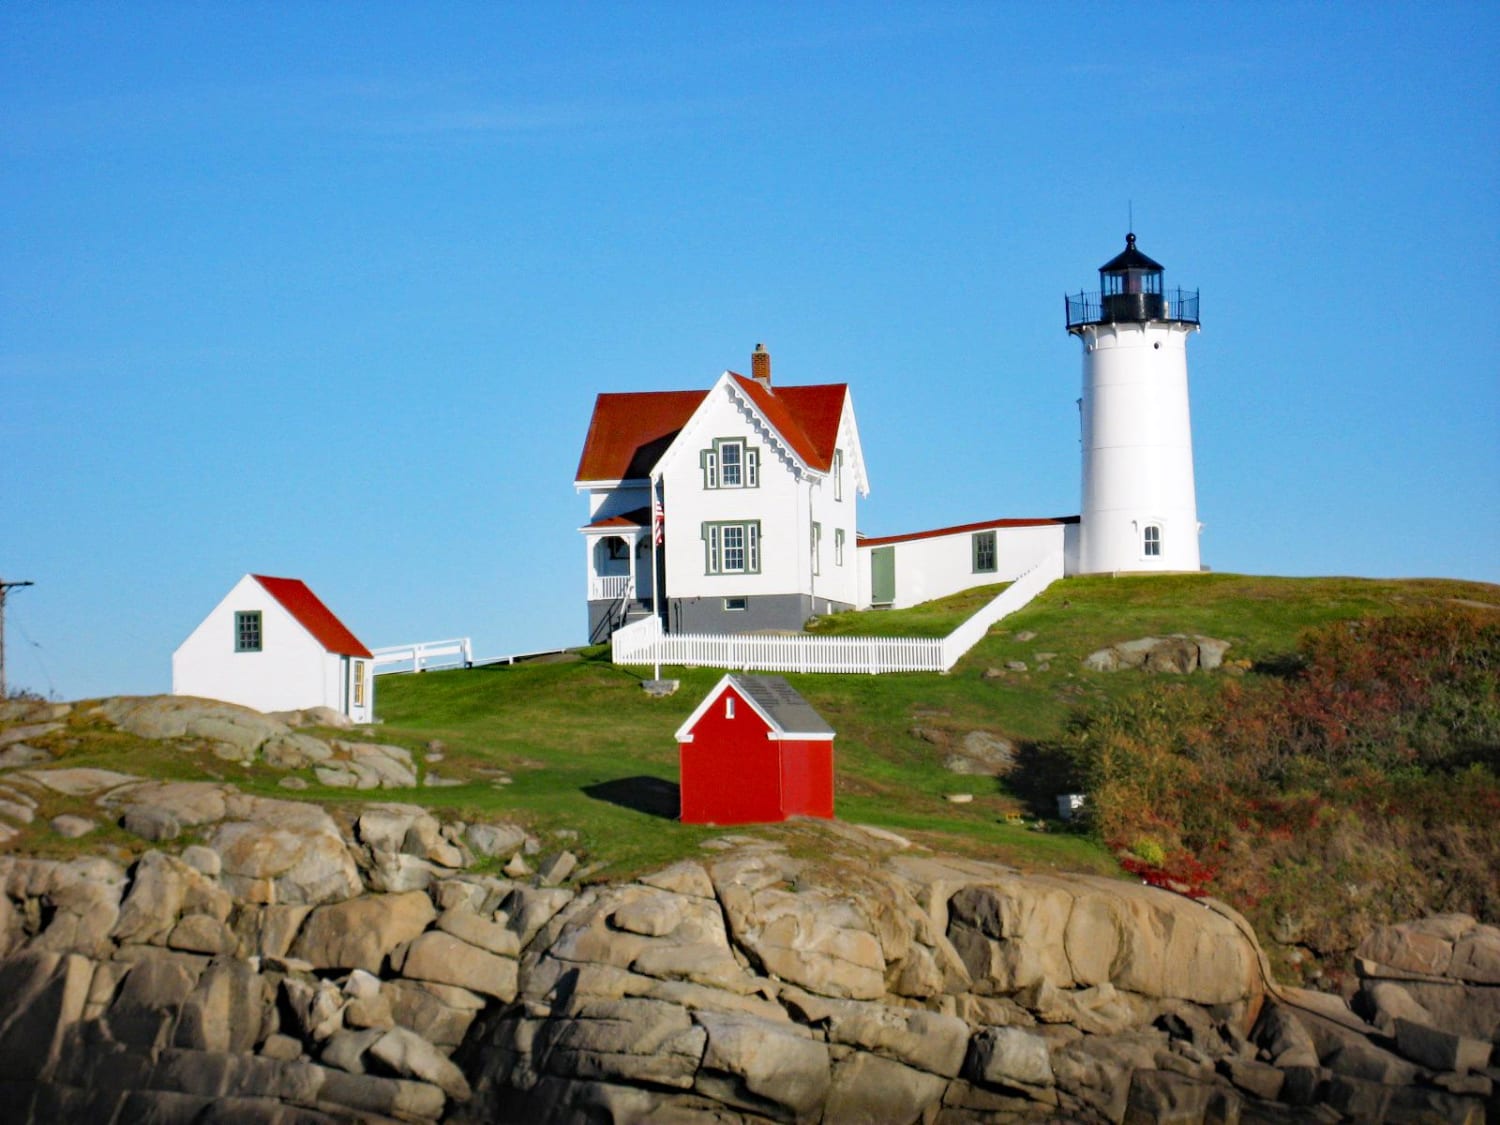 Nubble Lighthouse in York, Maine